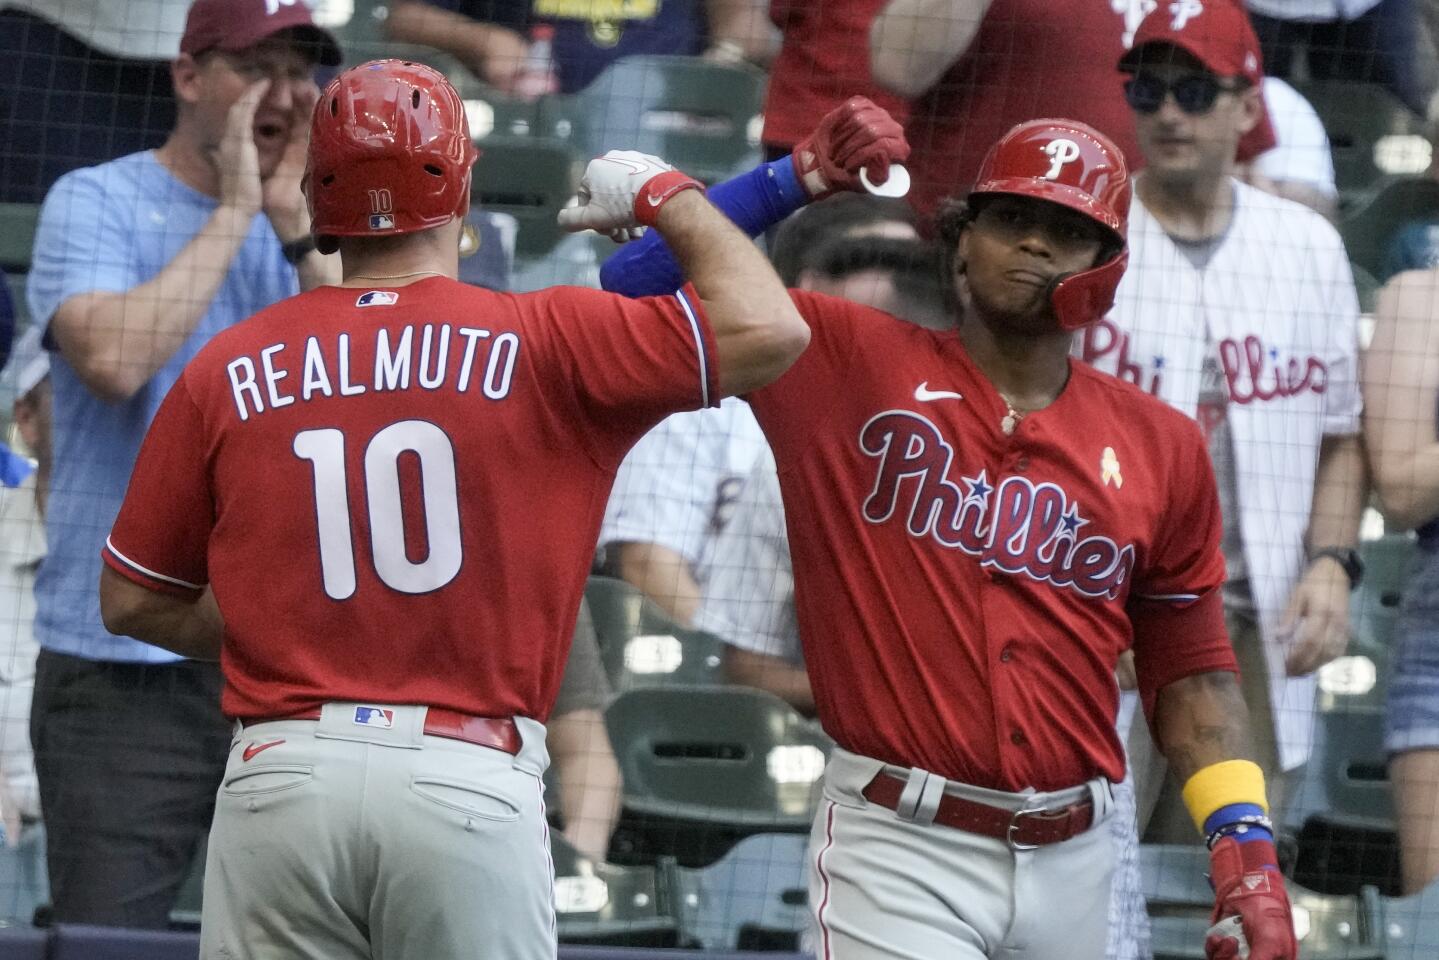 Photos from Phillies' 10-6 win in NL Championship Game 4 against